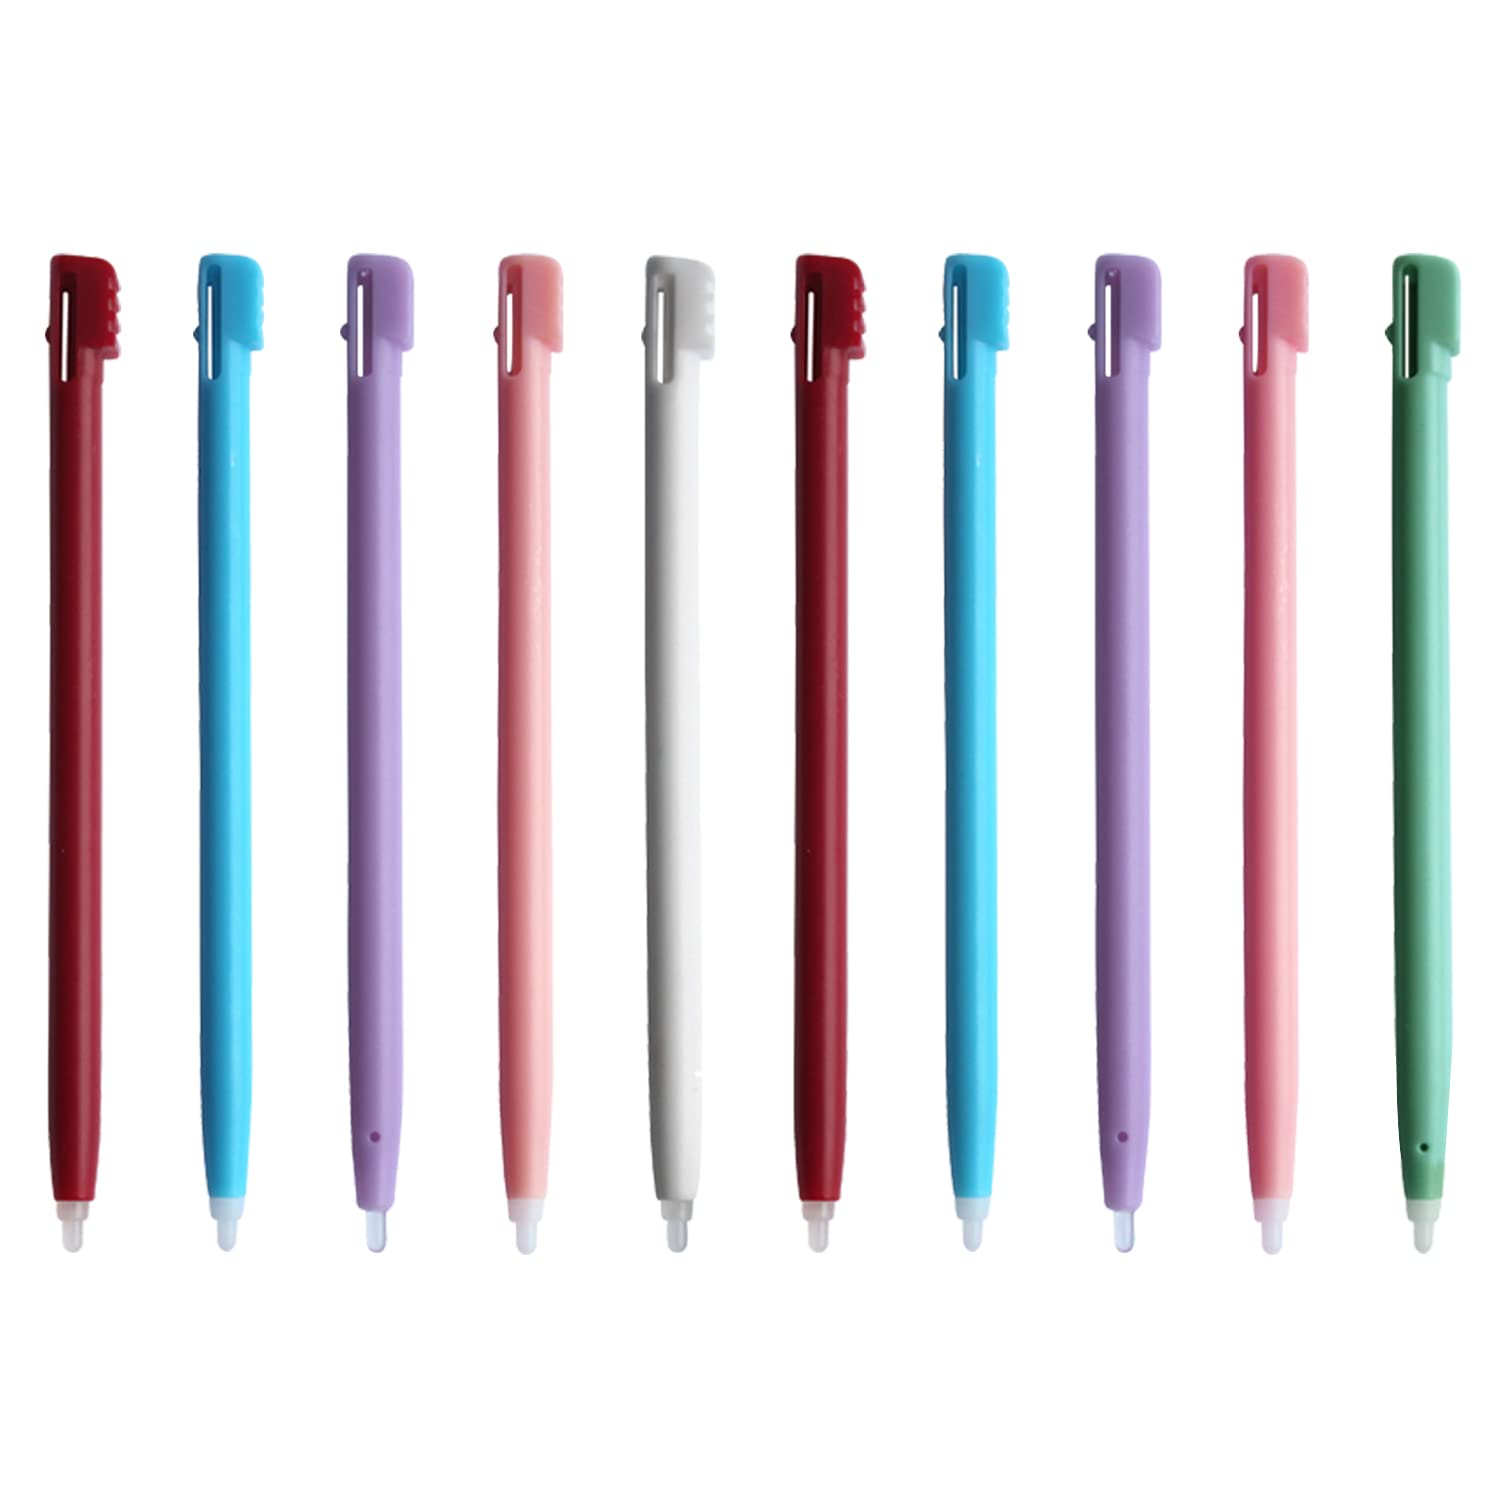 OSTENT Color Touch Stylus Pen for Nintendo NDSL NDS Lite Pack of 10